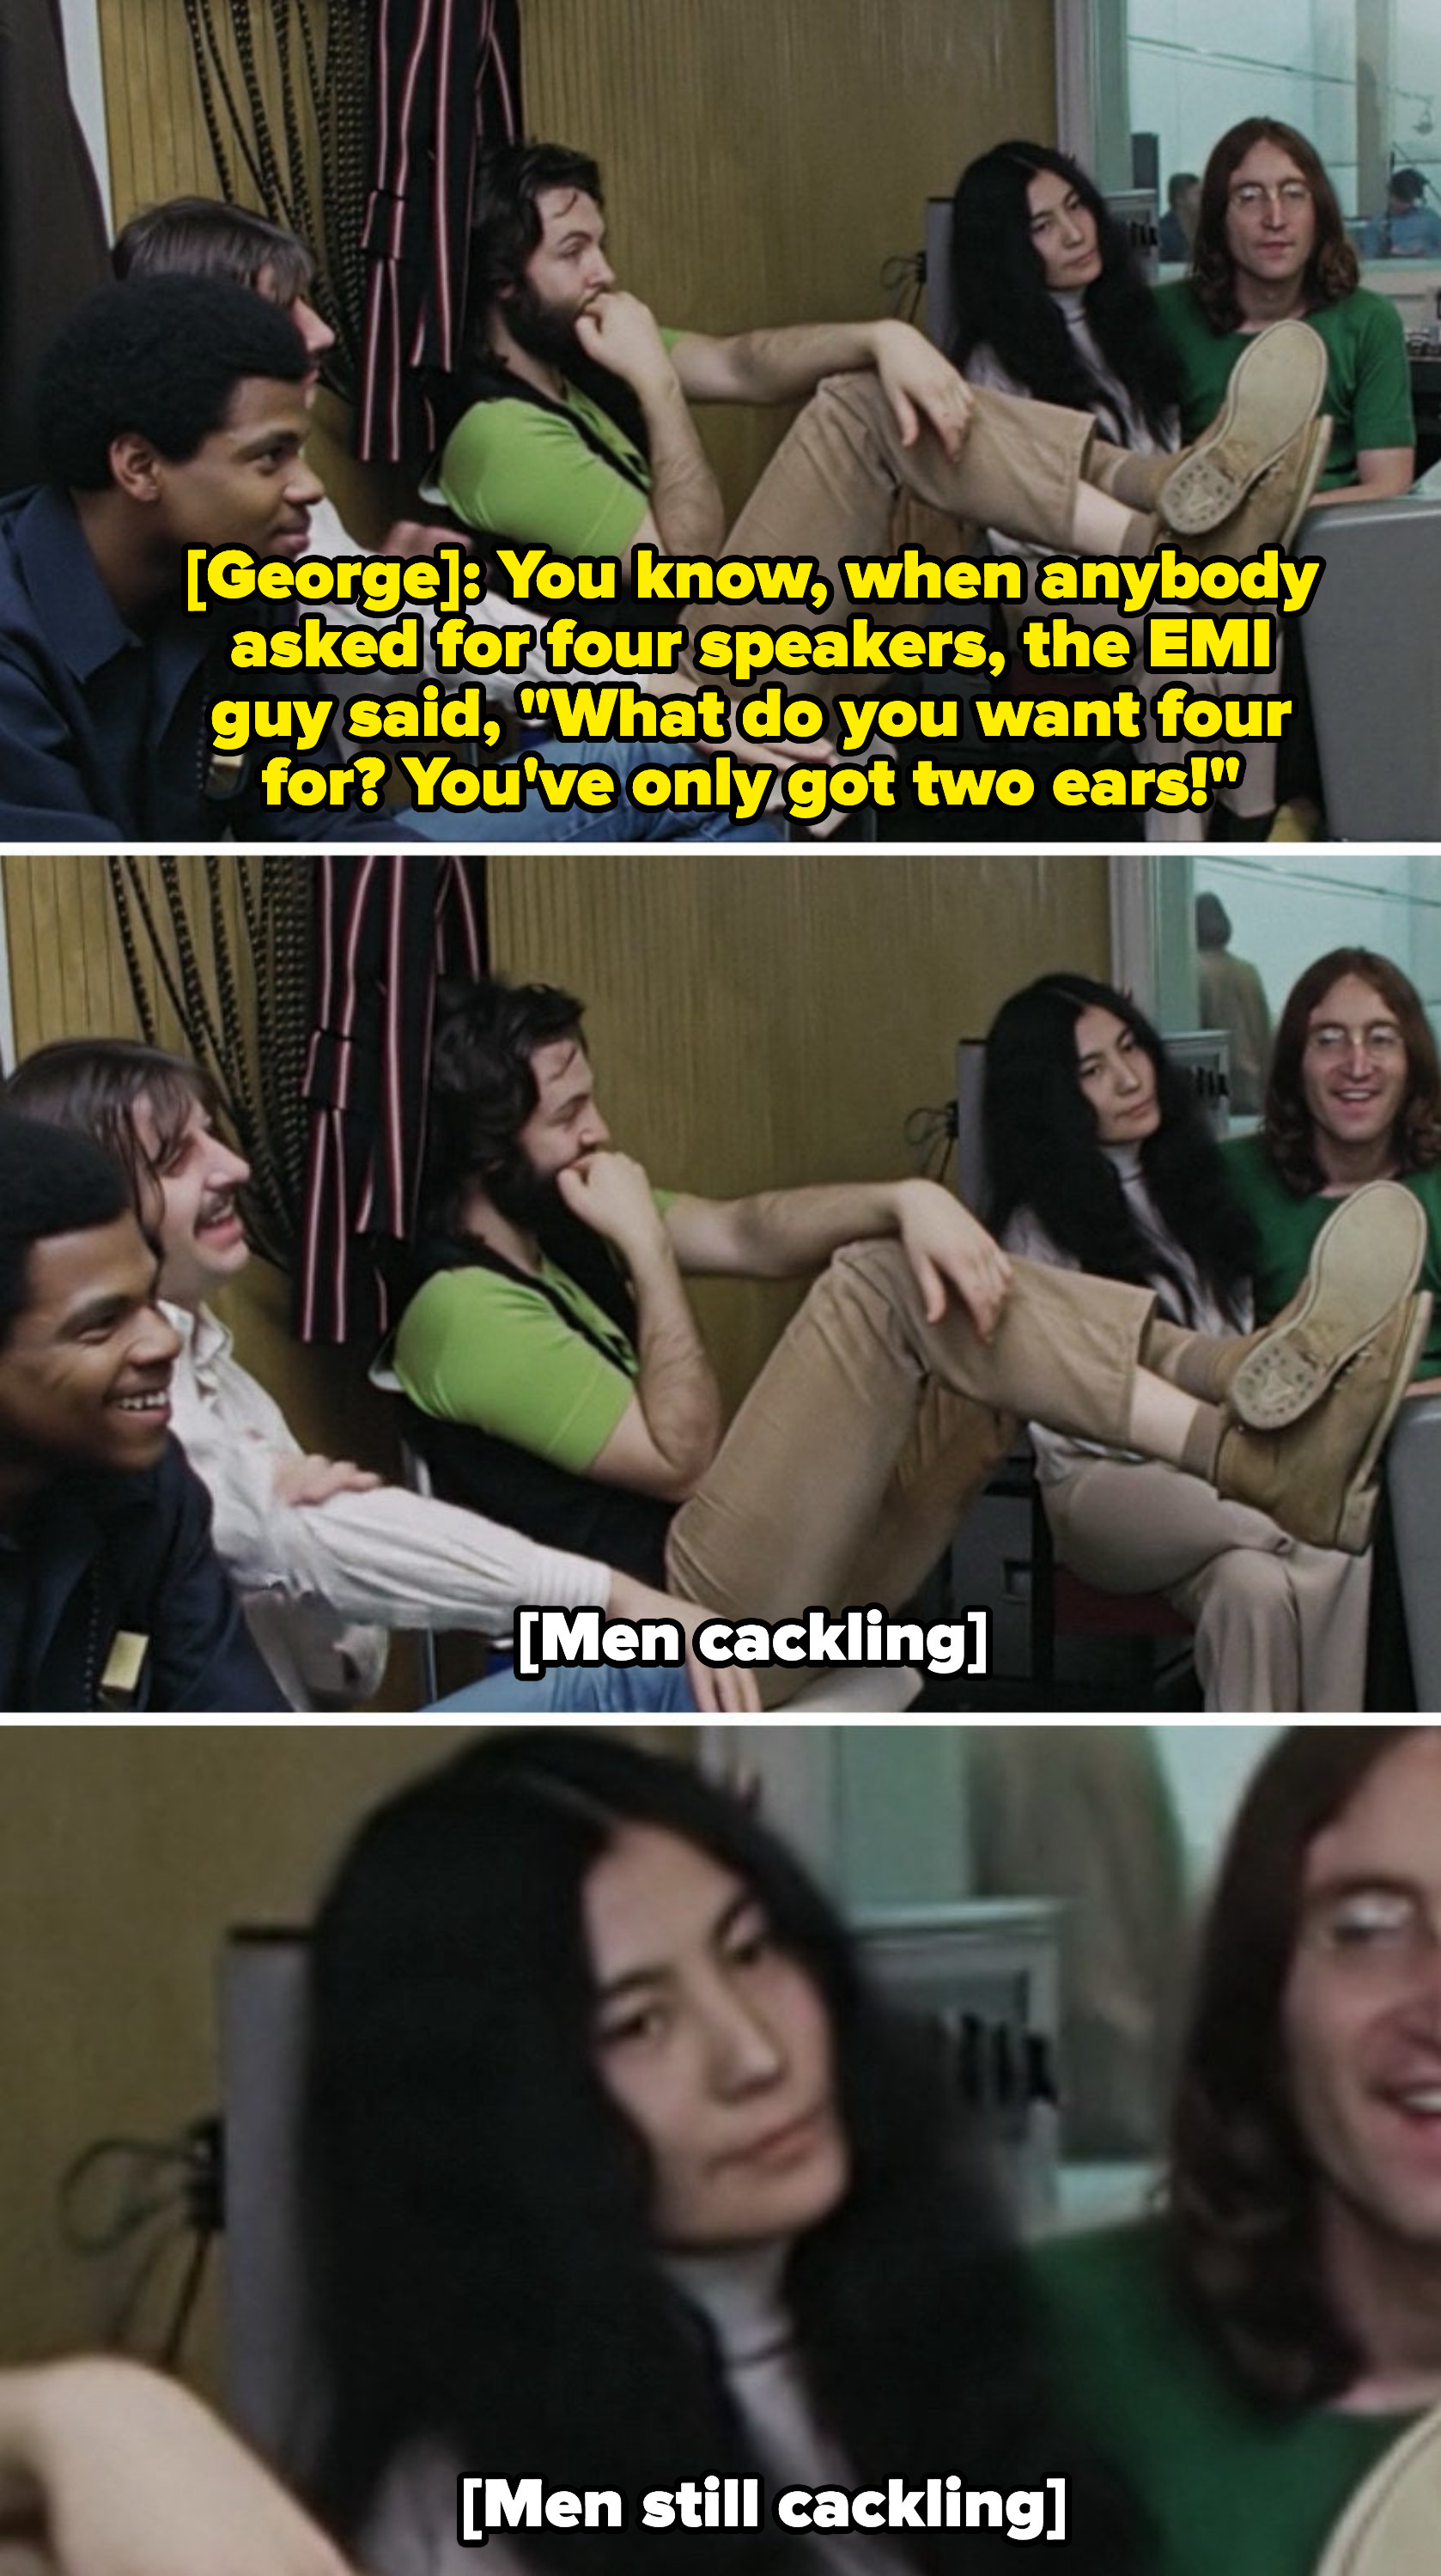 George&#x27;s joke: &quot;When anybody asked for four speakers, the EMI guy said, &#x27;What do you want four for? You&#x27;ve only got two ears!&#x27;&quot; while all the men laugh, and Yoko stares into space